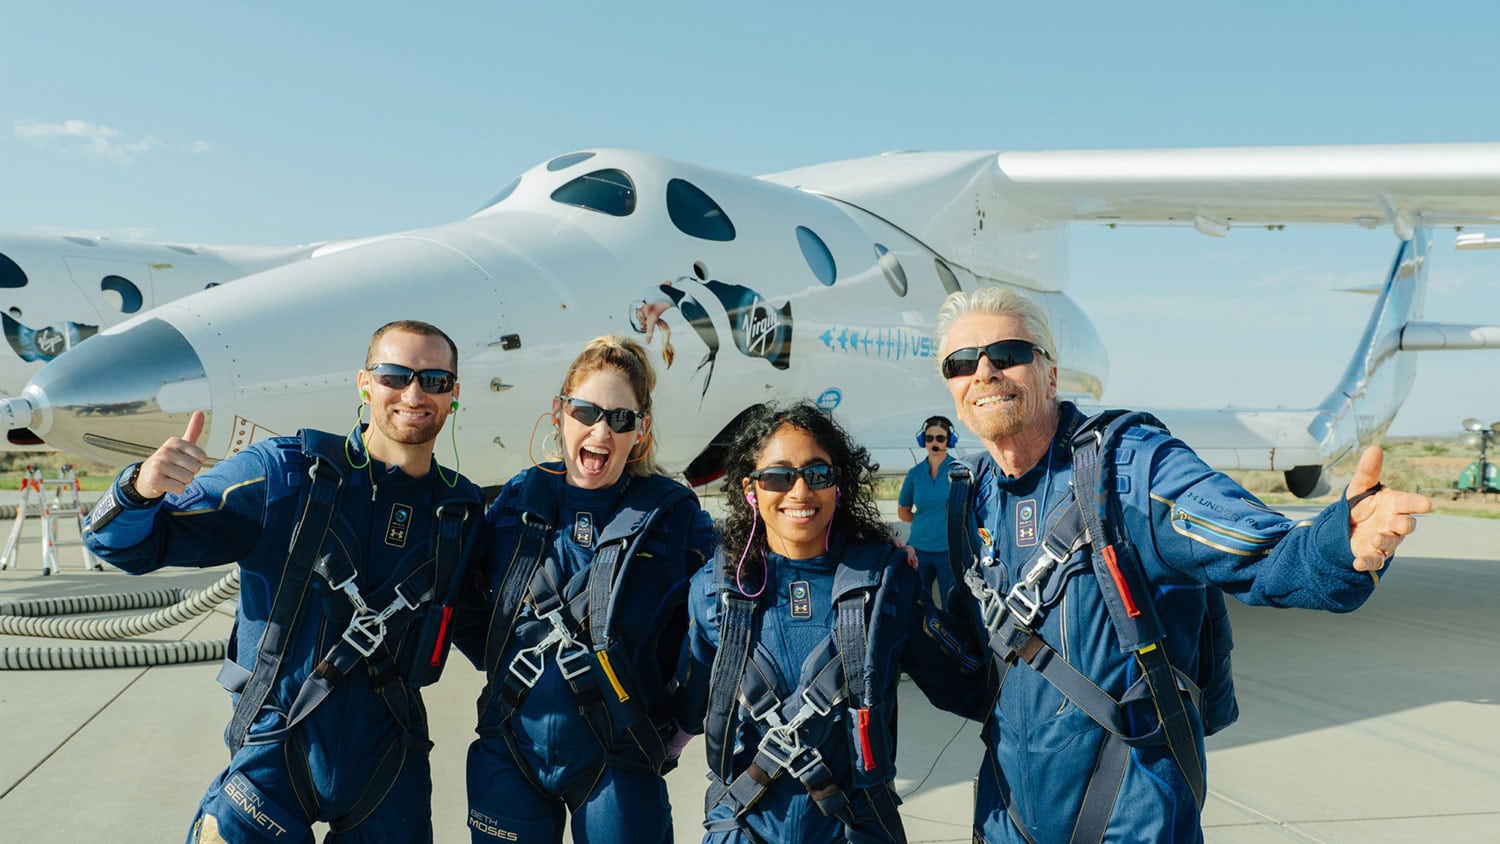 Richard Branson’s Virgin Galactic completes first fully crewed spaceflight.